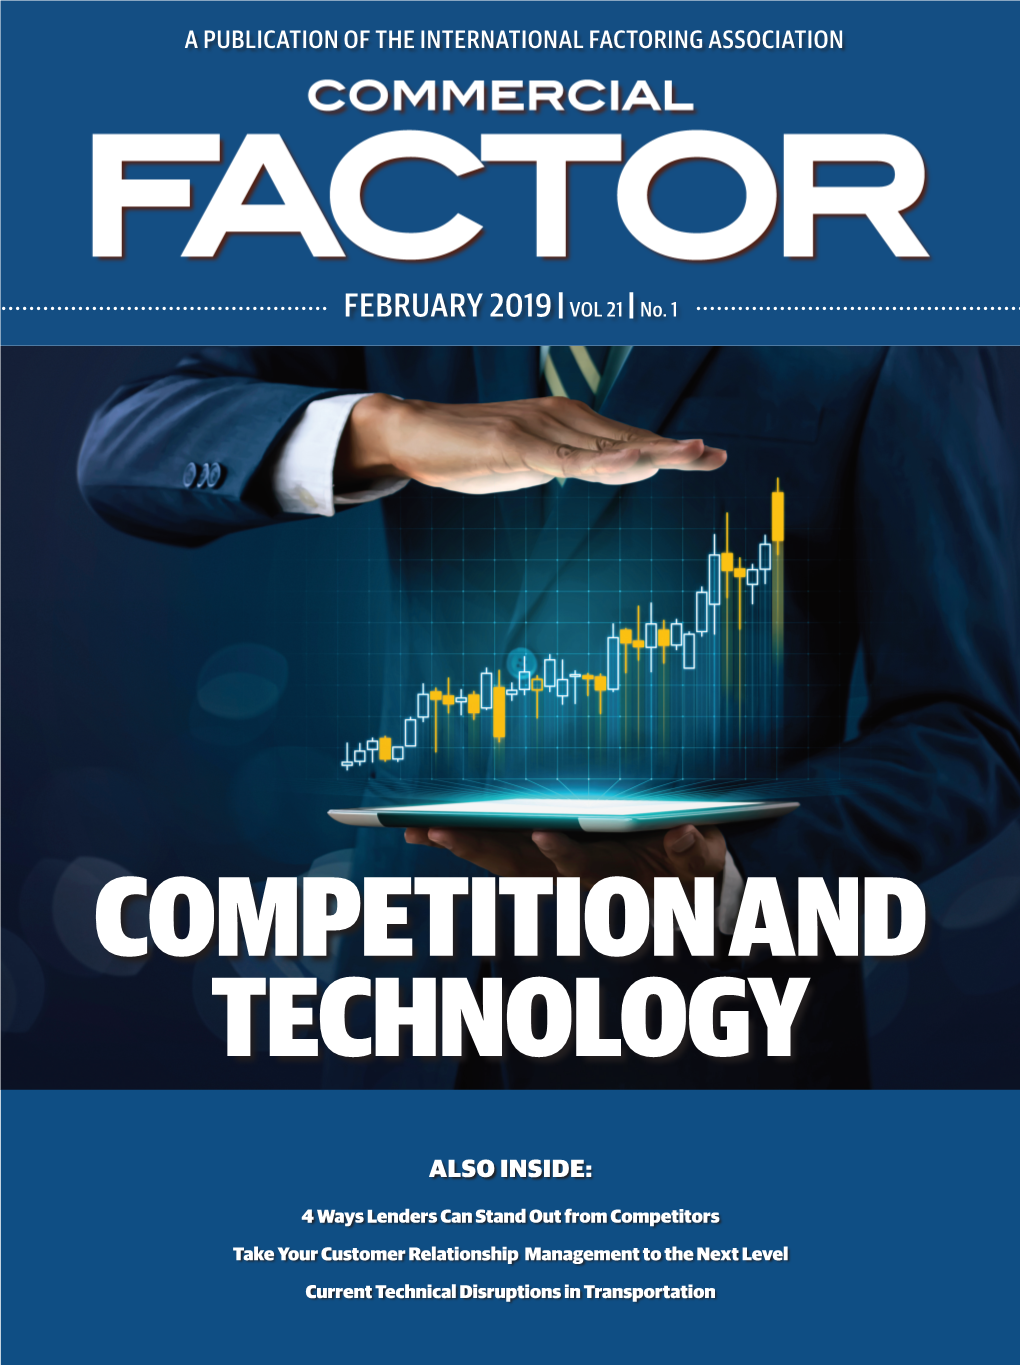 Competition and Technology